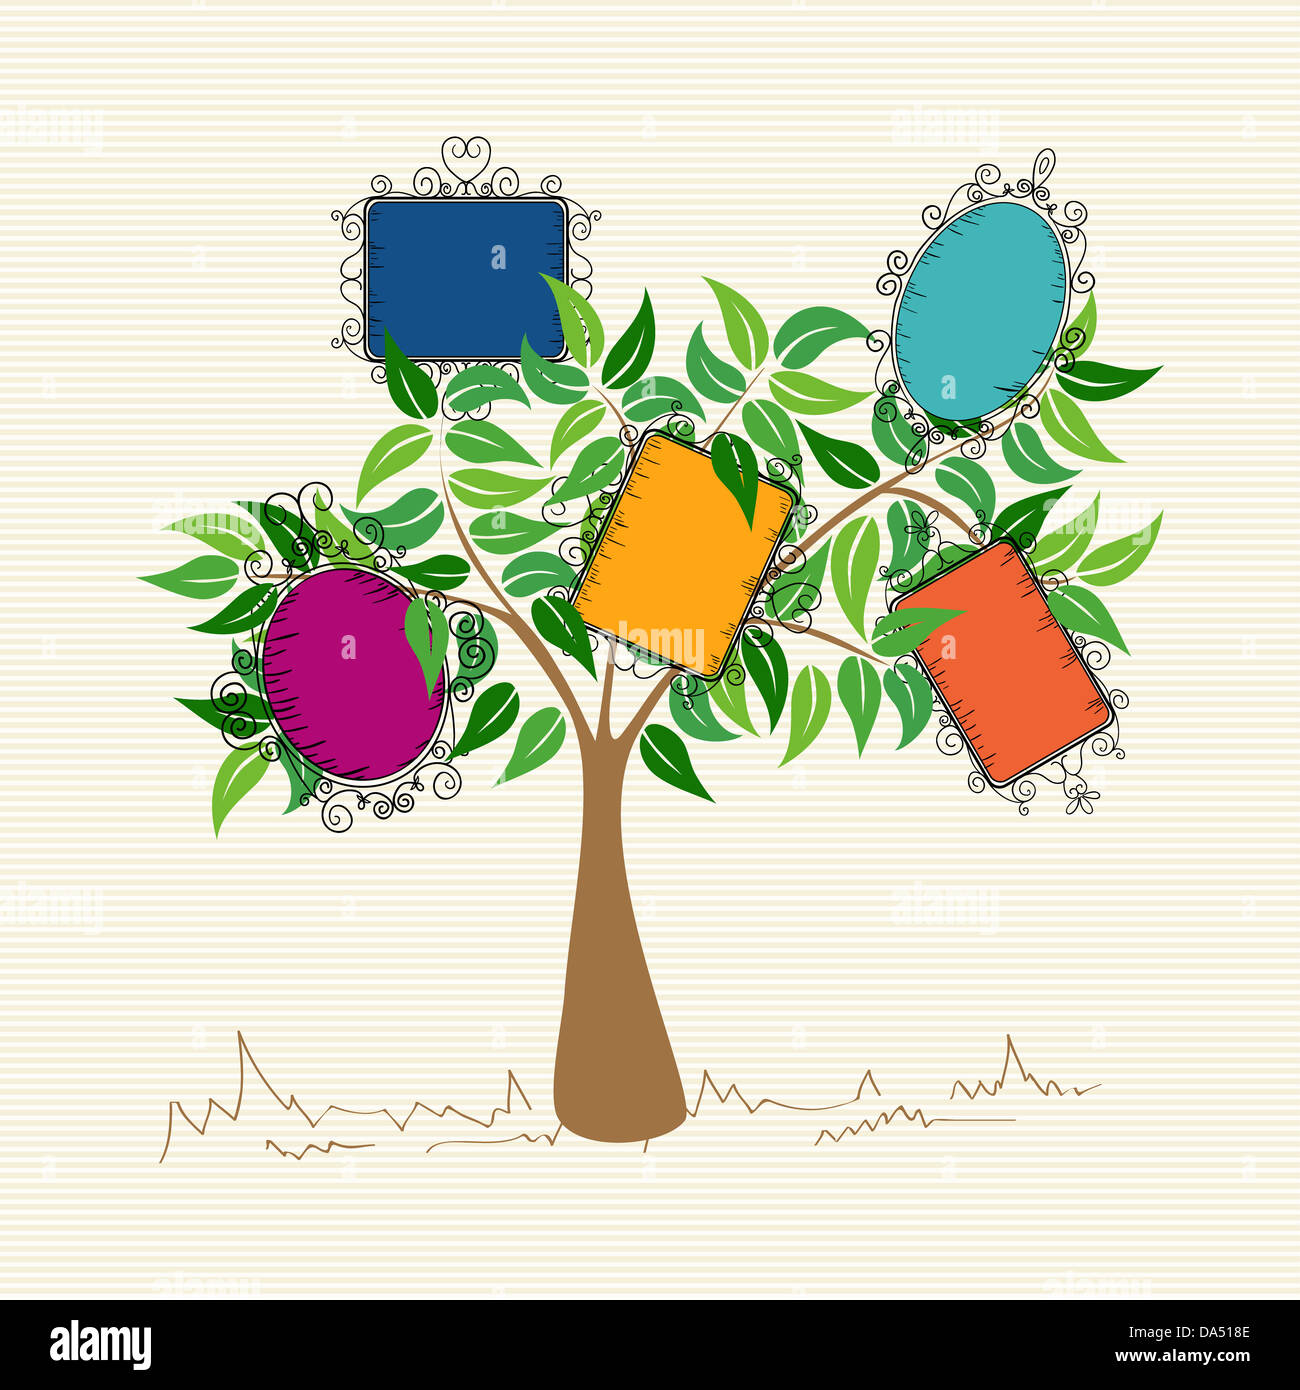 Trendy colorful old school leaf tree design. Vector file layered for easy manipulation and custom coloring. Stock Photo